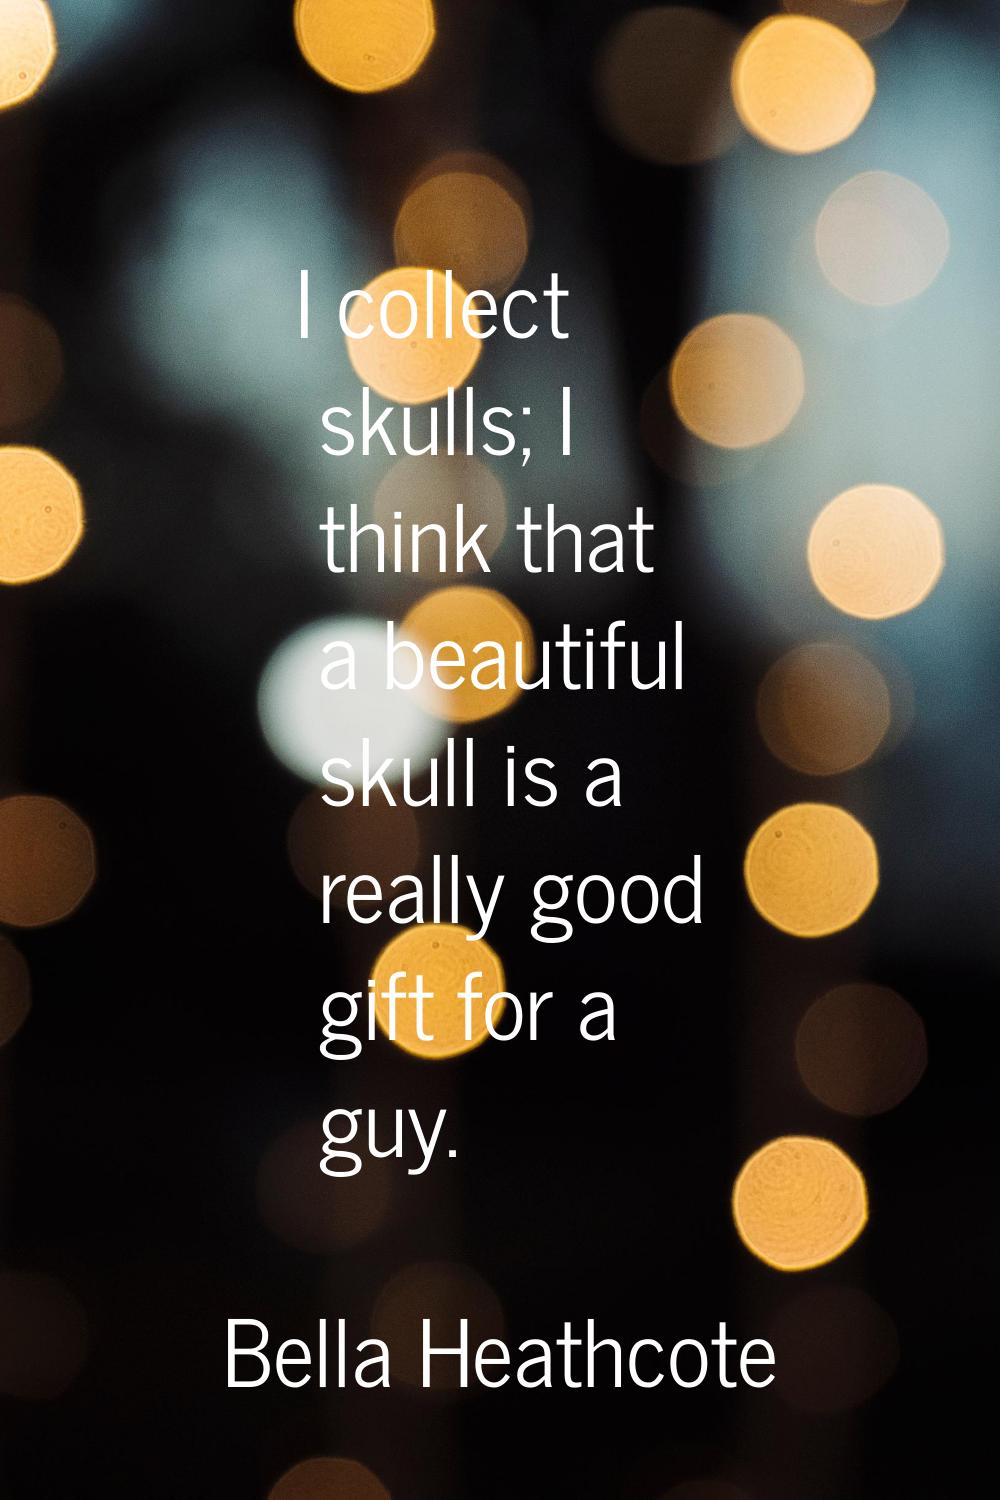 I collect skulls; I think that a beautiful skull is a really good gift for a guy.